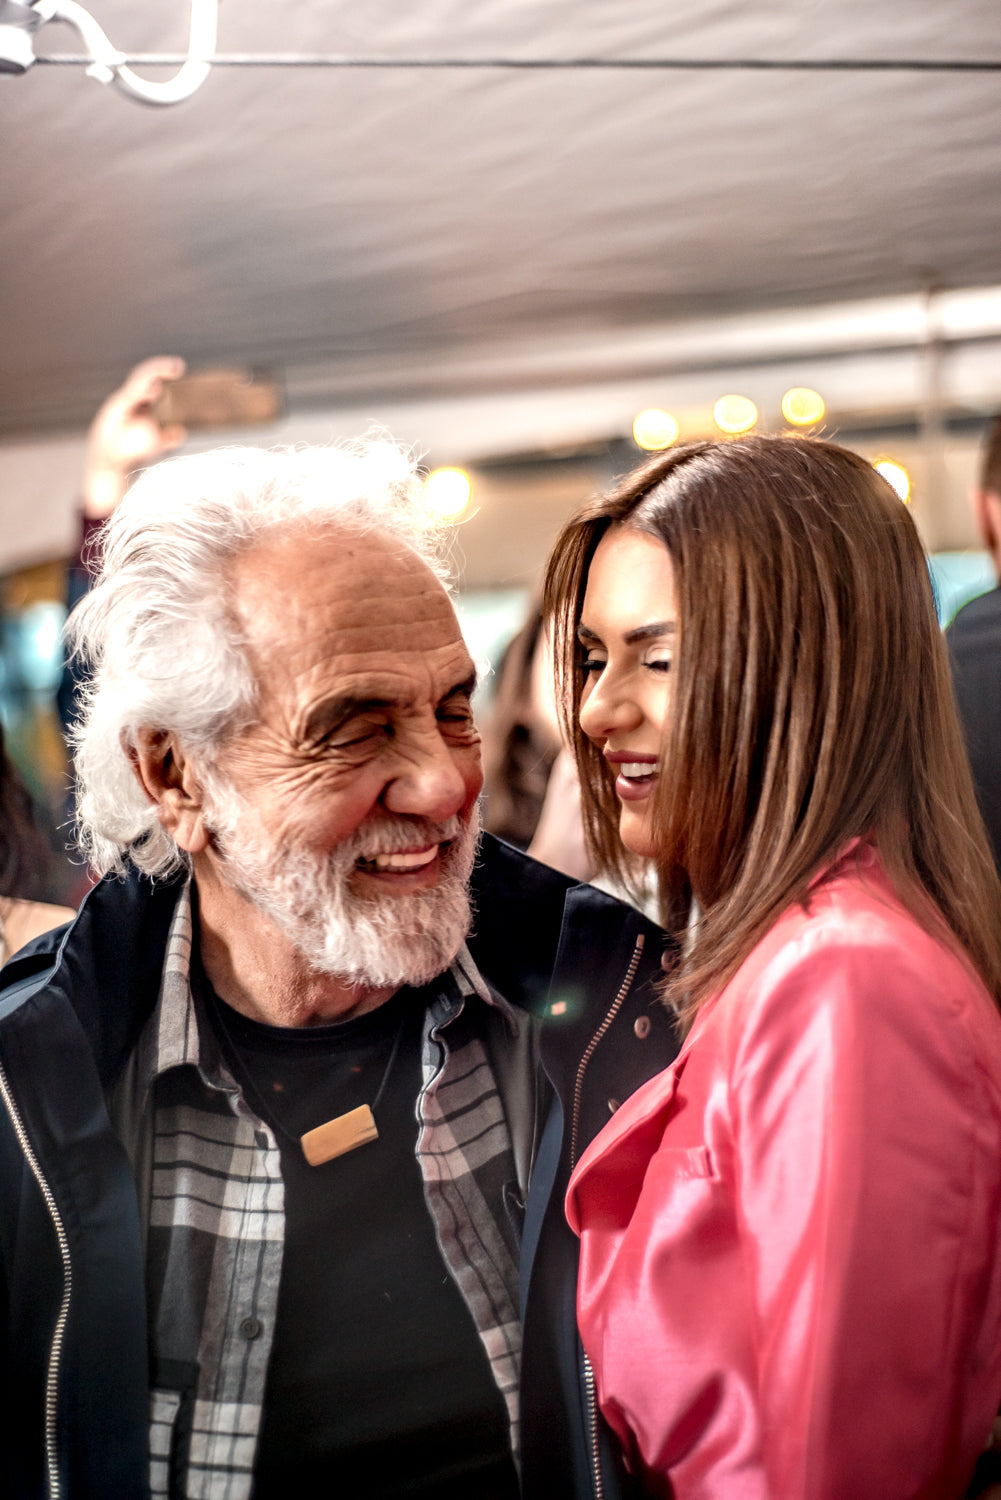 Tommy Chong and Miss Universe Canada 2019, Alyssa Boston share a smile at a launch party